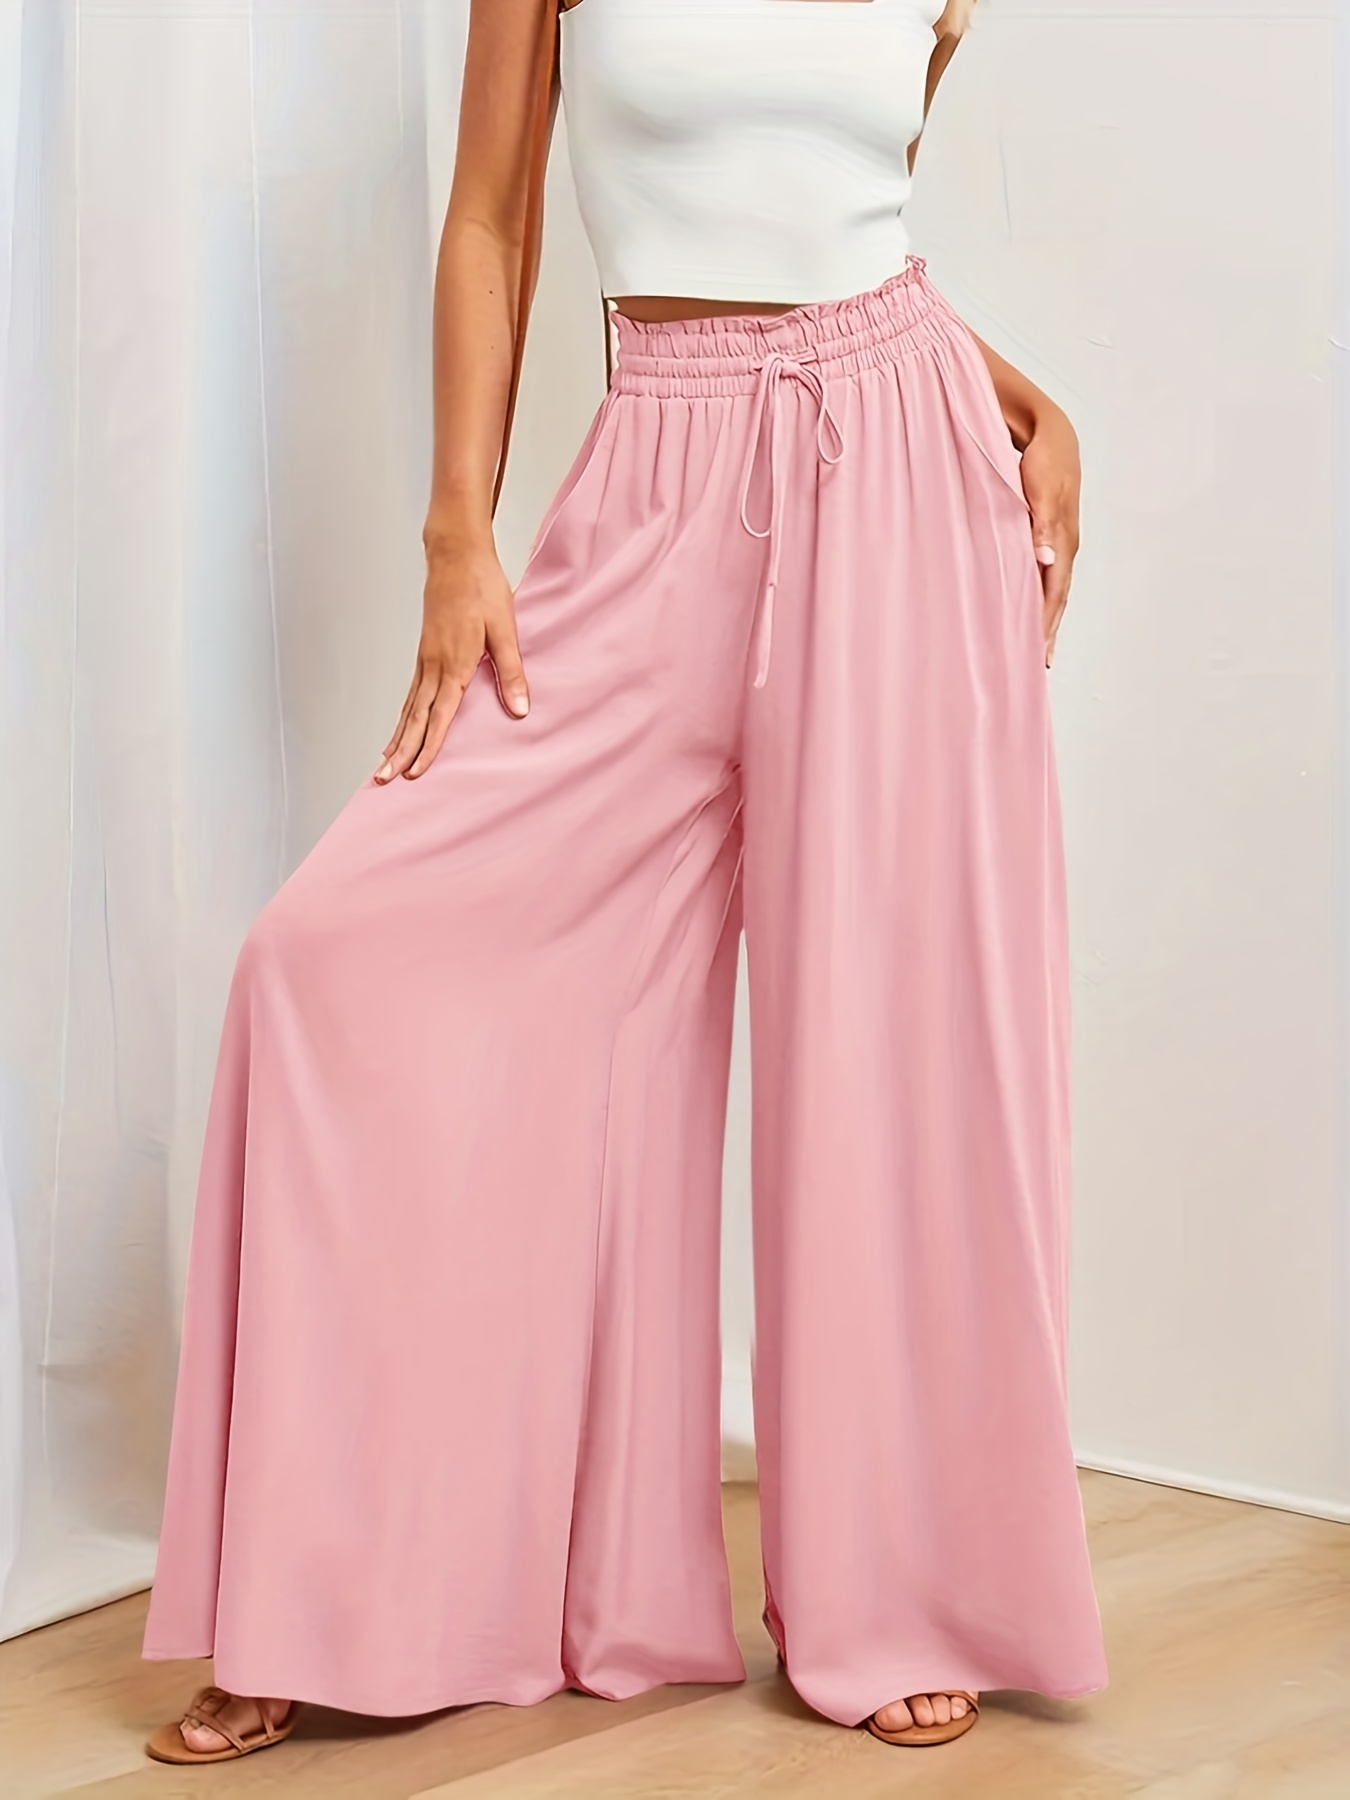 TEMPUCK Trousers For Women Women's wide leg pants Summer high waist loose  straight tube lightweight breathable soft stretch women's jeans (Color :  Light Blue, Size : 1) price in Saudi Arabia